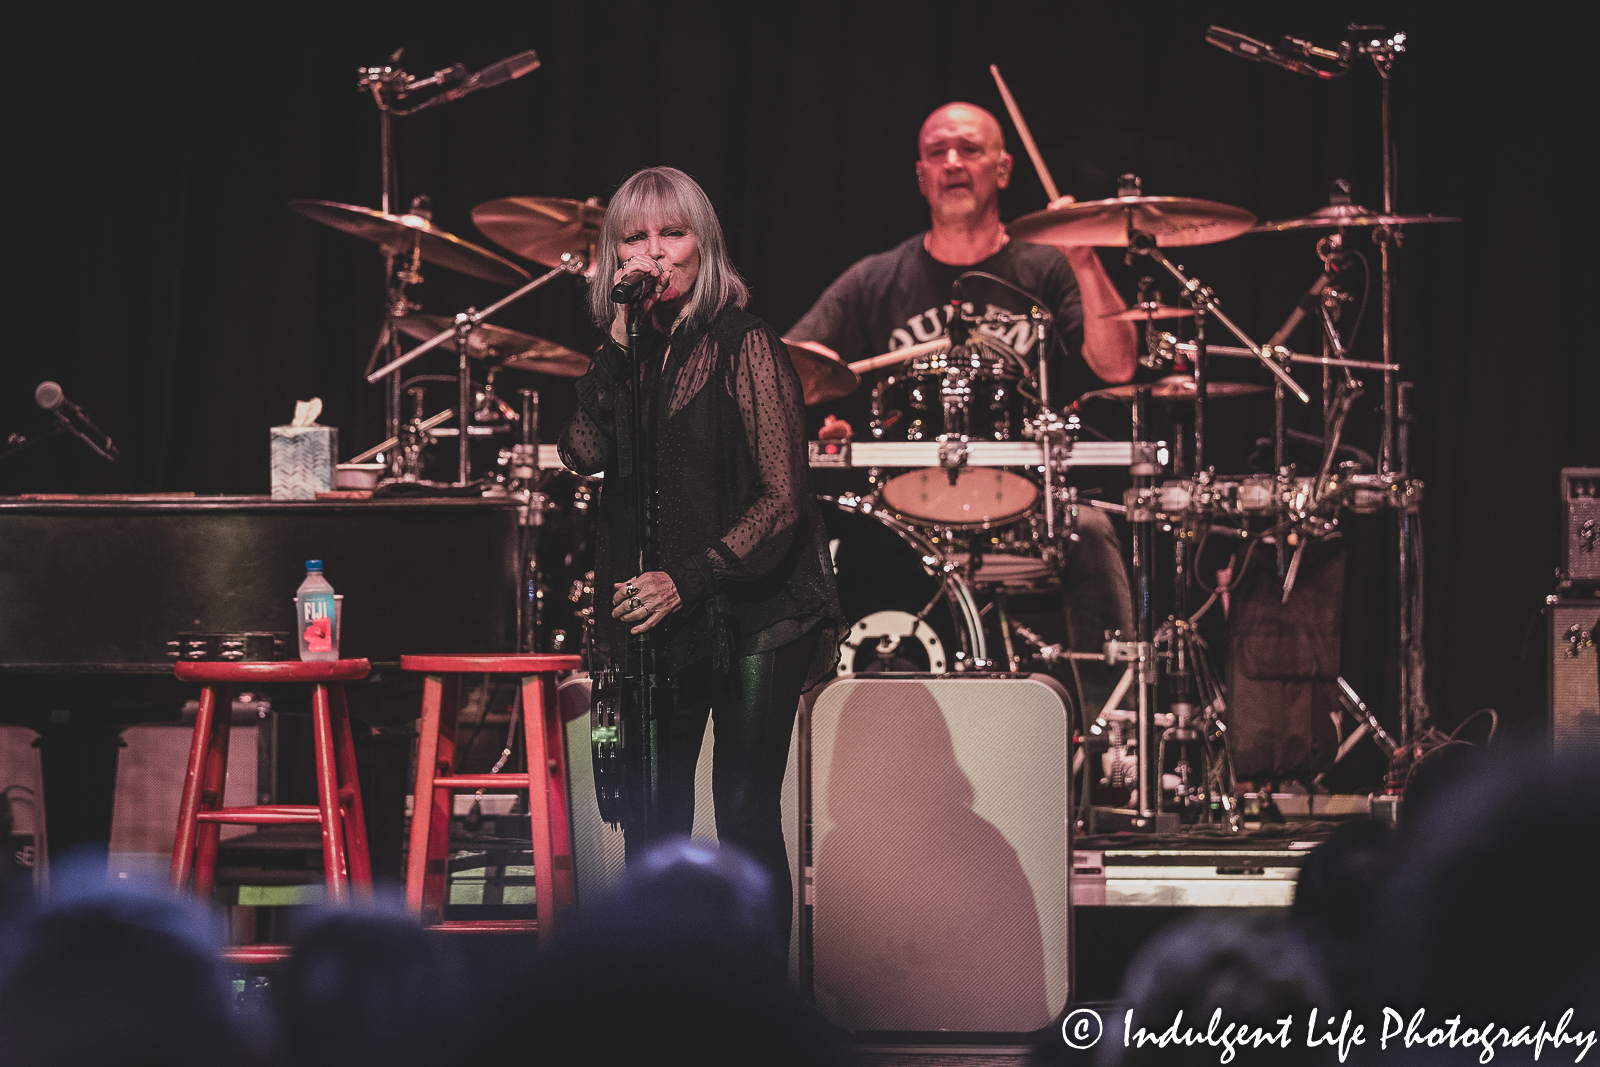 Pat Benatar live in concert together with drummer Chris Ralles at Uptown Theater in Kansas City, MO on August 2, 2022.